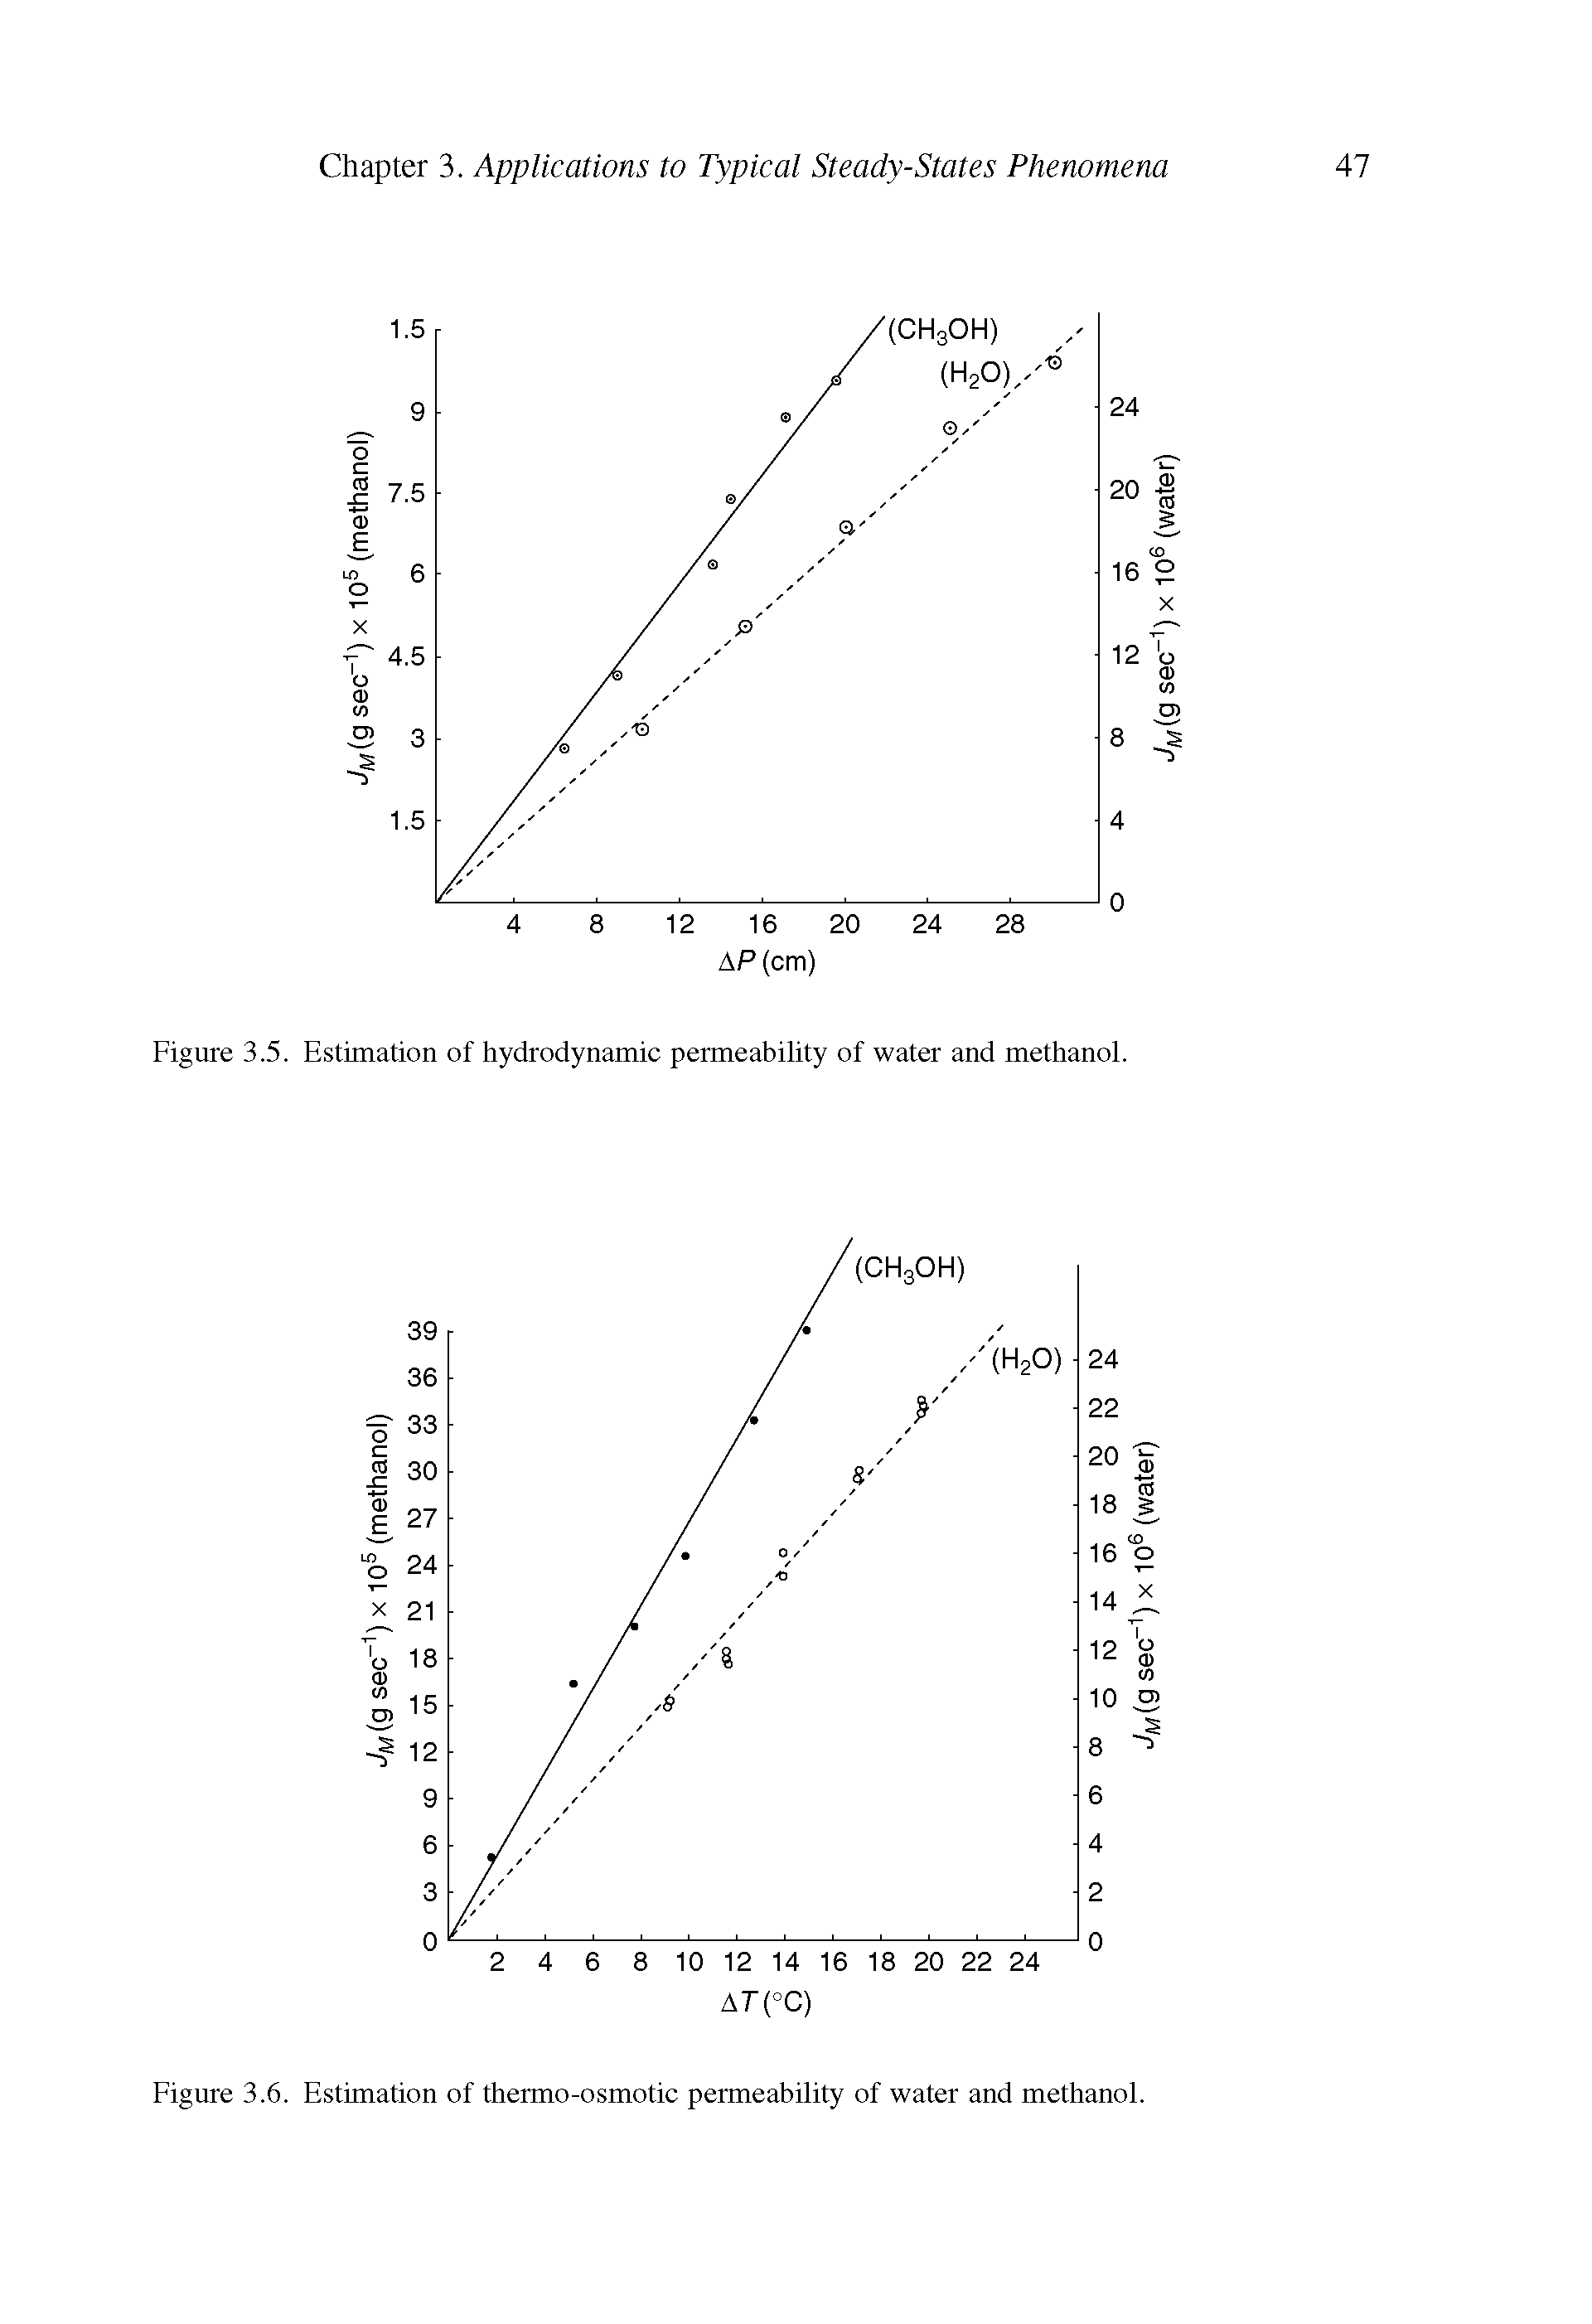 Figure 3.5. Estimation of hydrodynamic permeability of water and methanol.